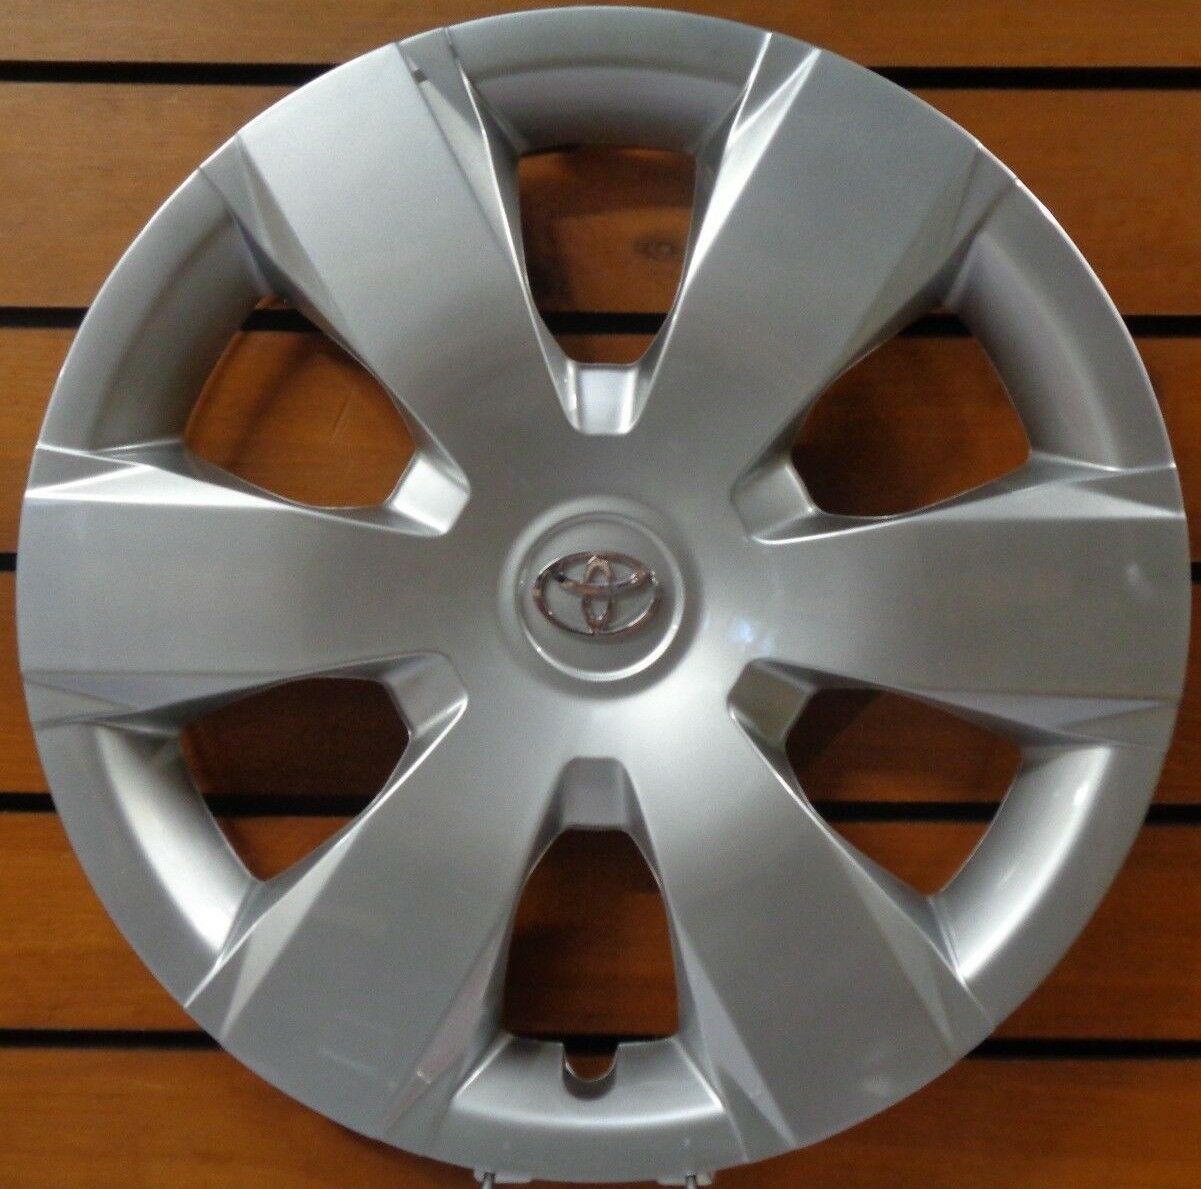 New 16" Hubcap Wheel Cover Fits 2007-2011 Toyota Camry Free Shipping 61137